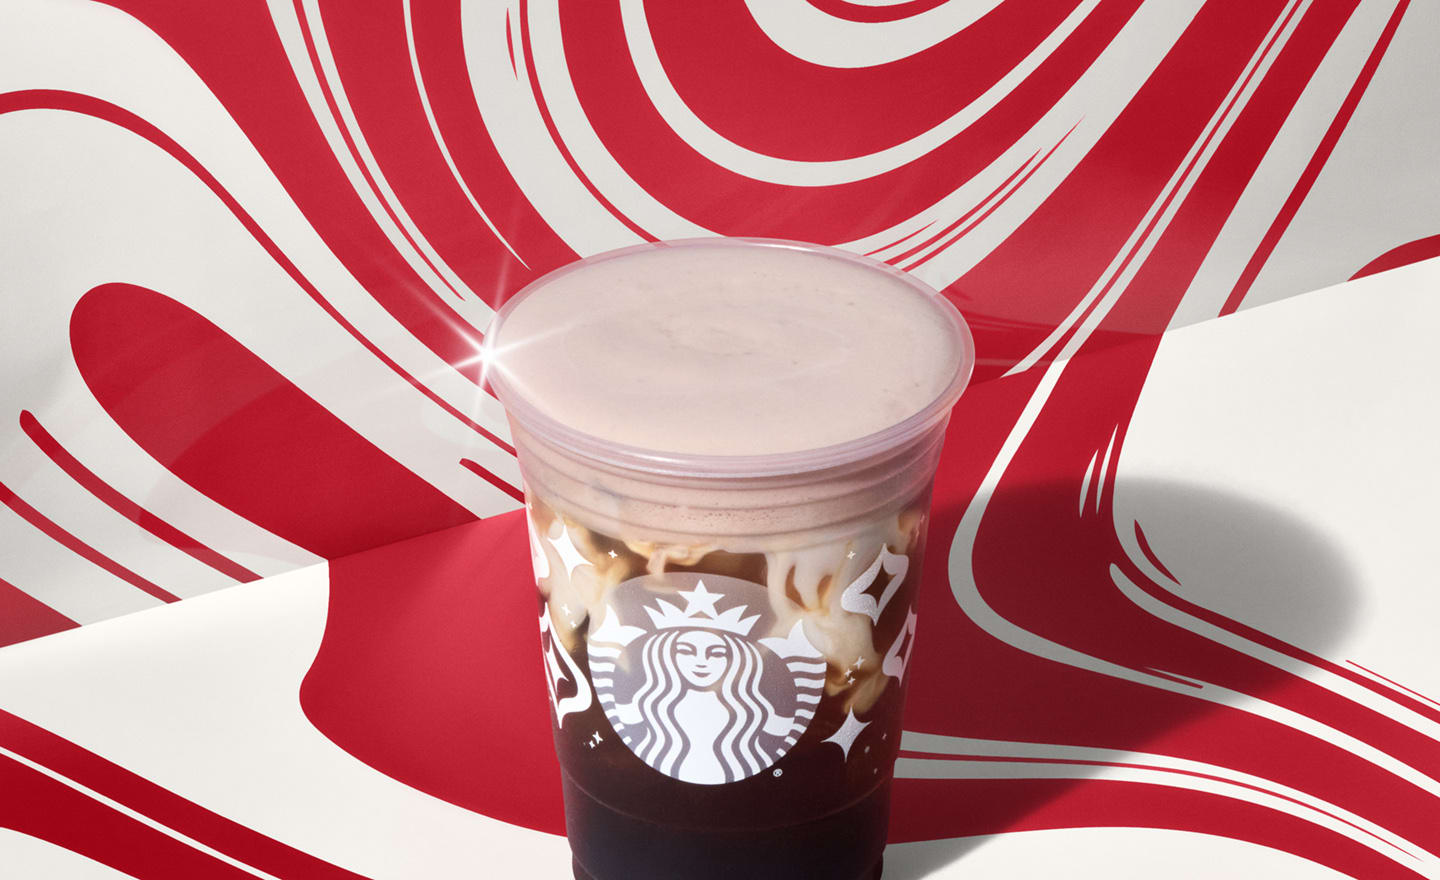 Starbucks is offering half off drinks every Thursday for the rest of the year